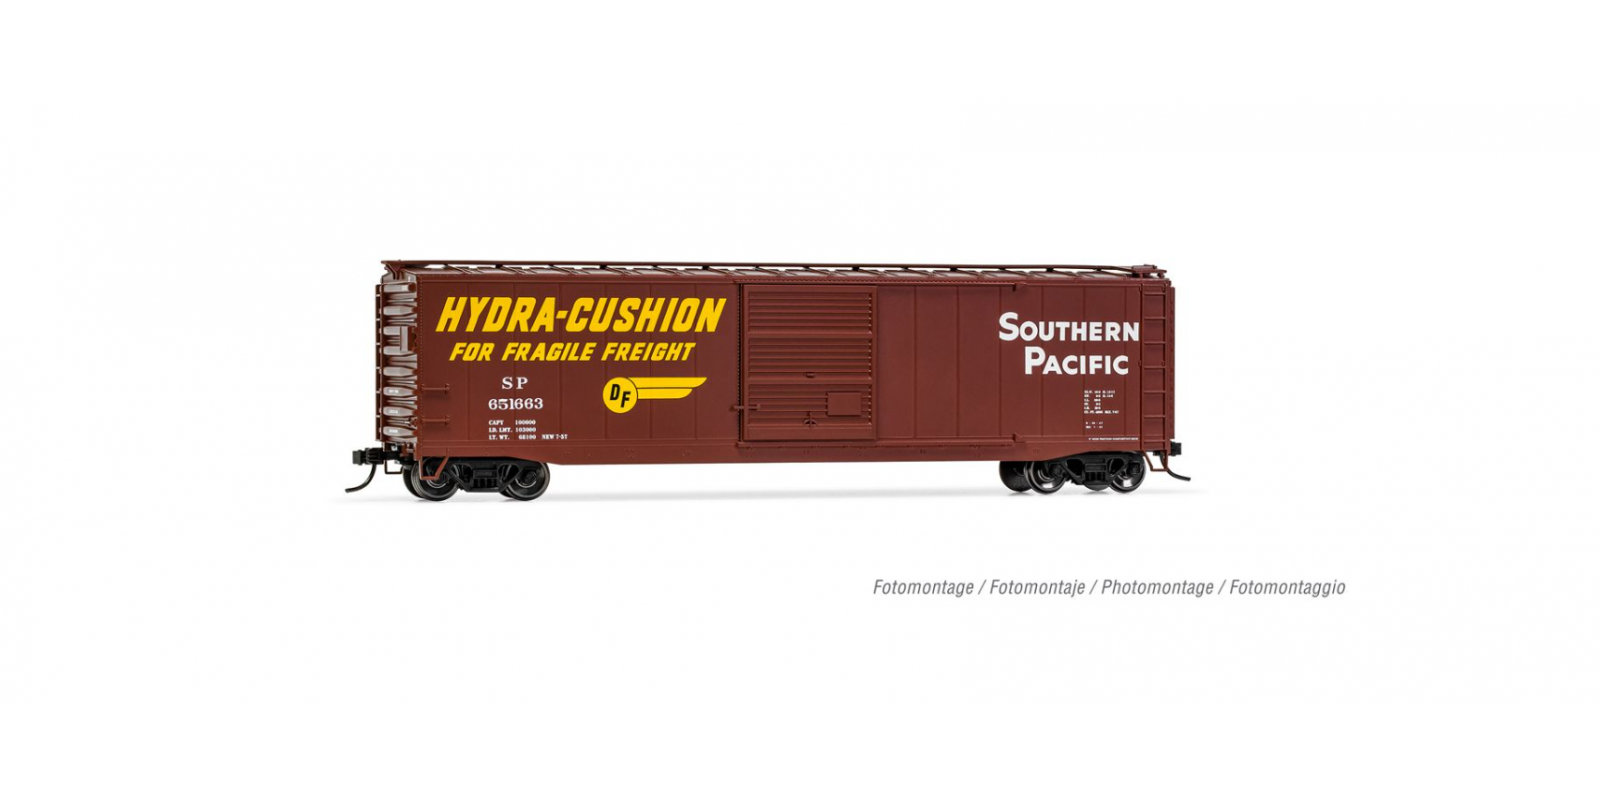 RI6585D Southern Pacific, Box Car, running number #4